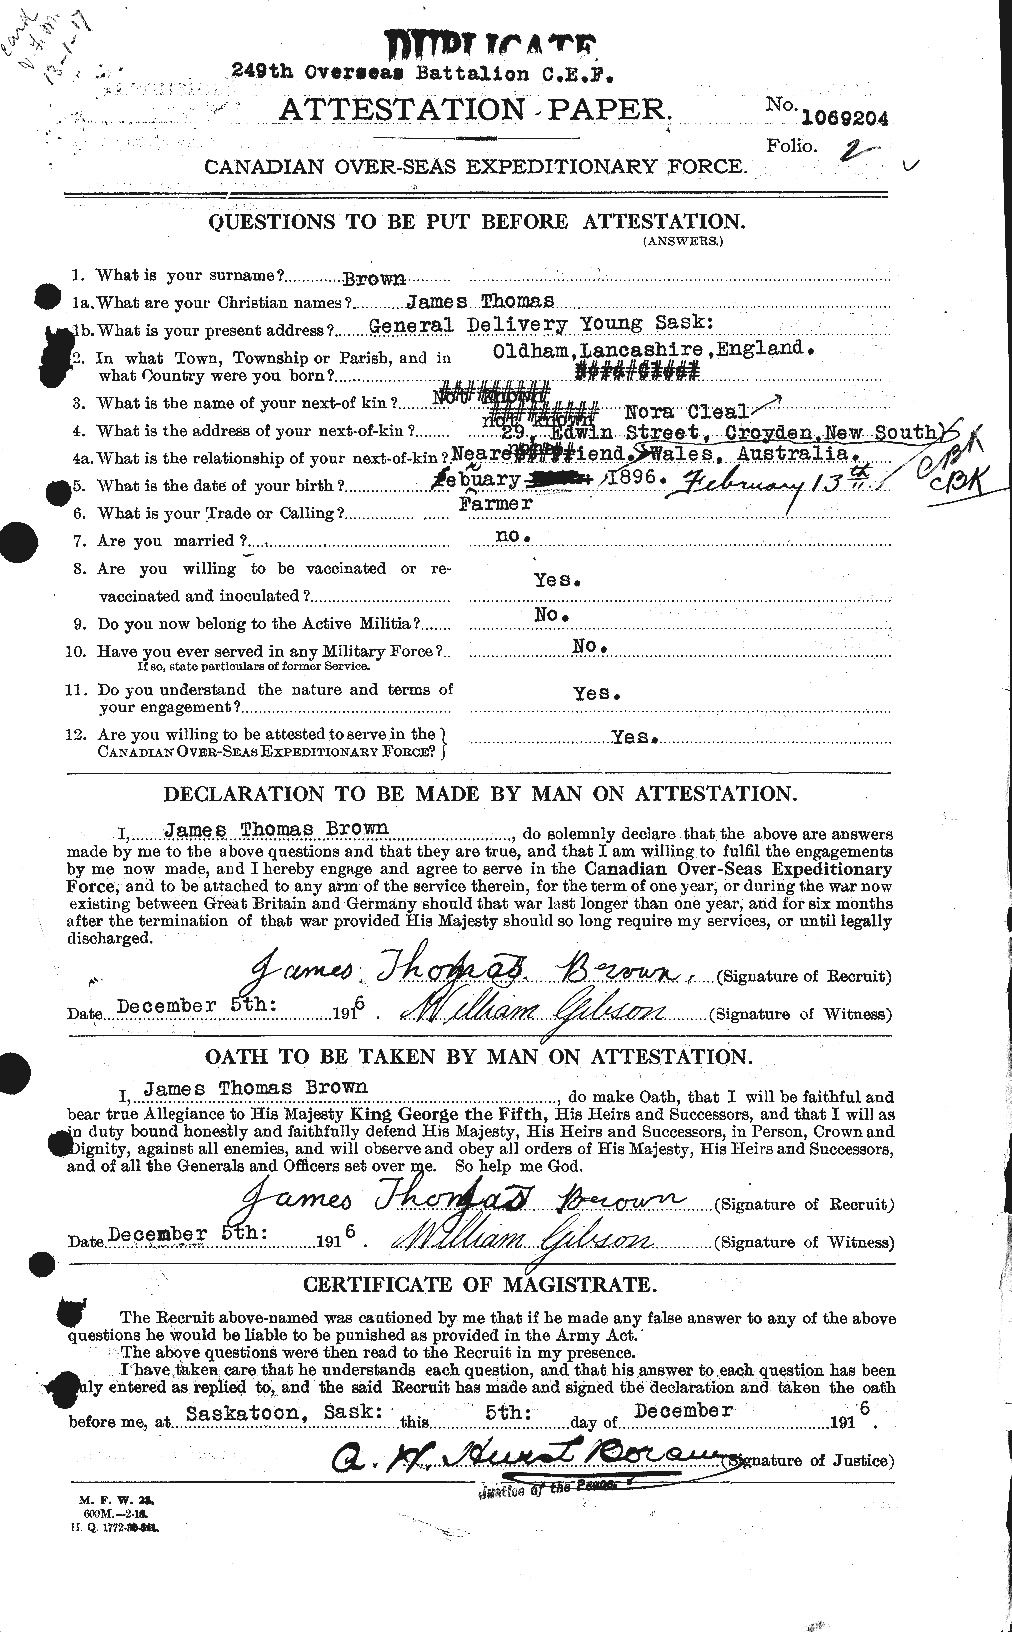 Personnel Records of the First World War - CEF 269589a